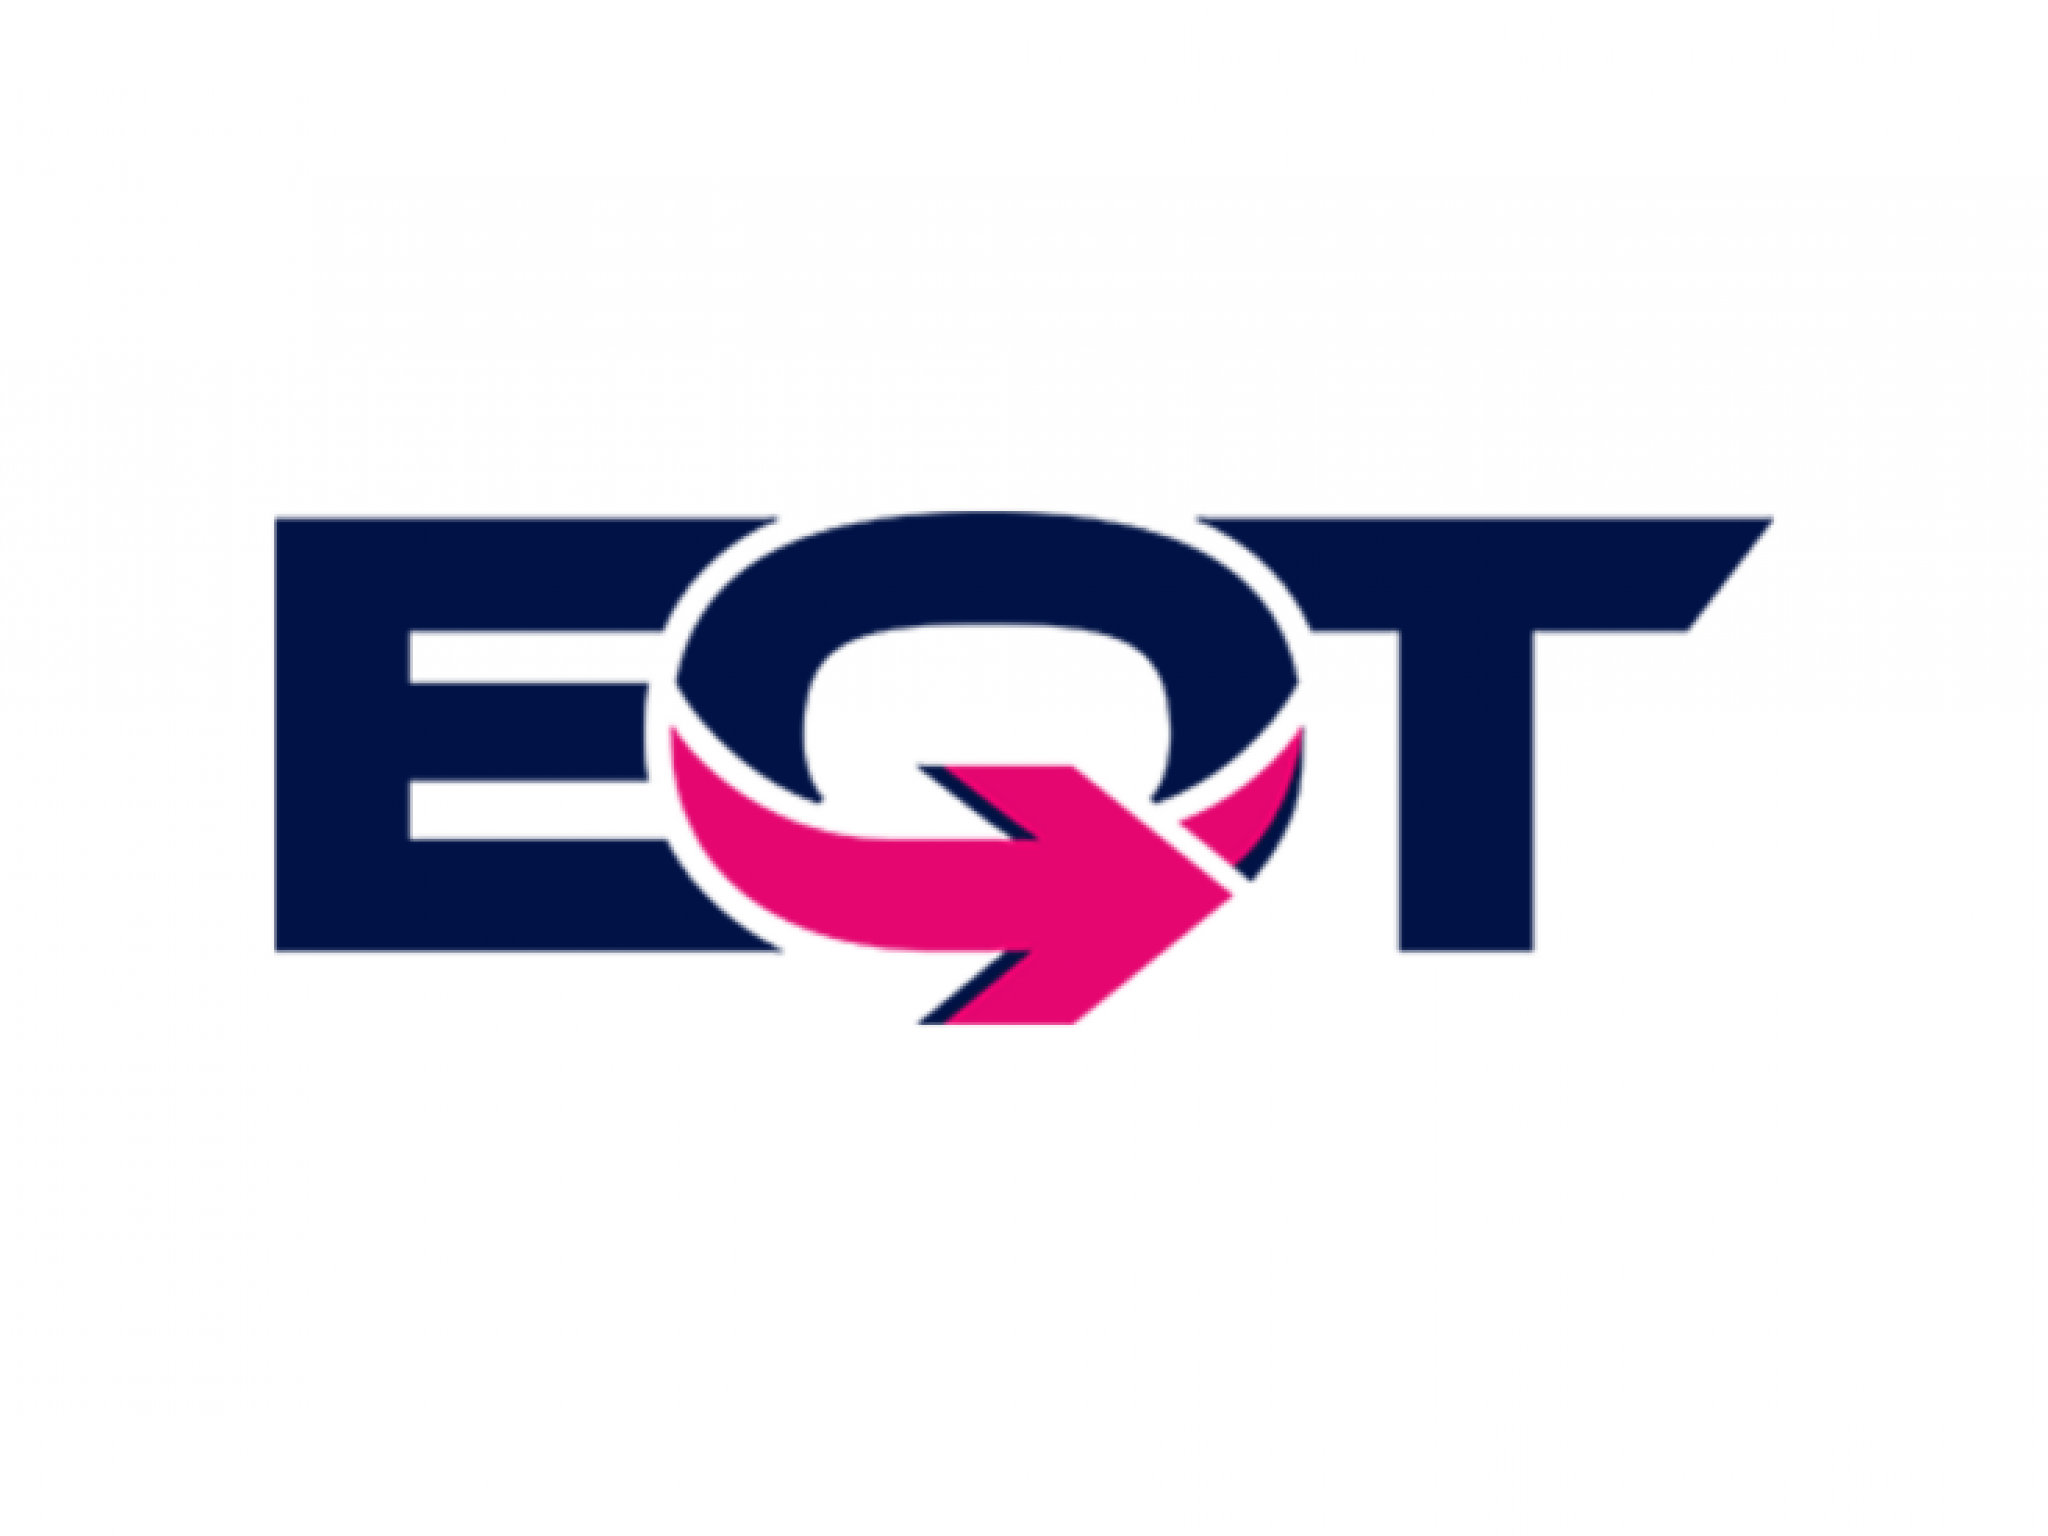  eqt-inks-non-operated-asset-deal-with-equinor-details 